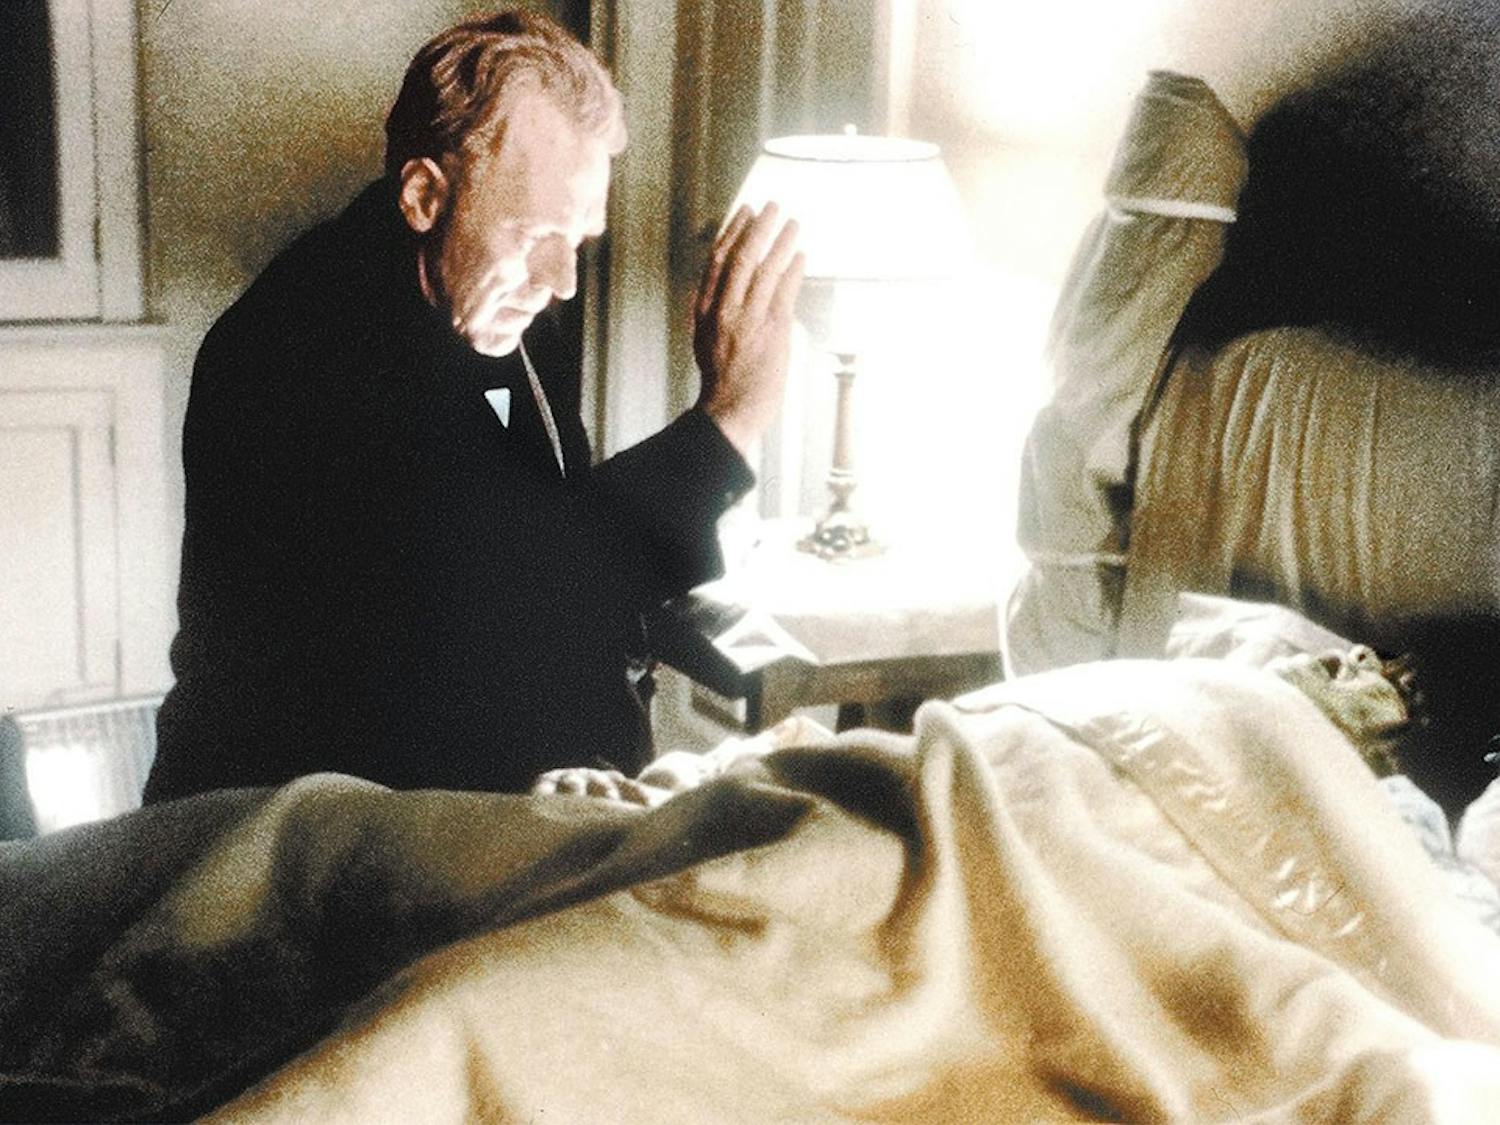 Father Merrin, played by Max von Sydow, seeks the inner demon in Regan (Linda Blair) in the 1973 film “The Exorcist.”